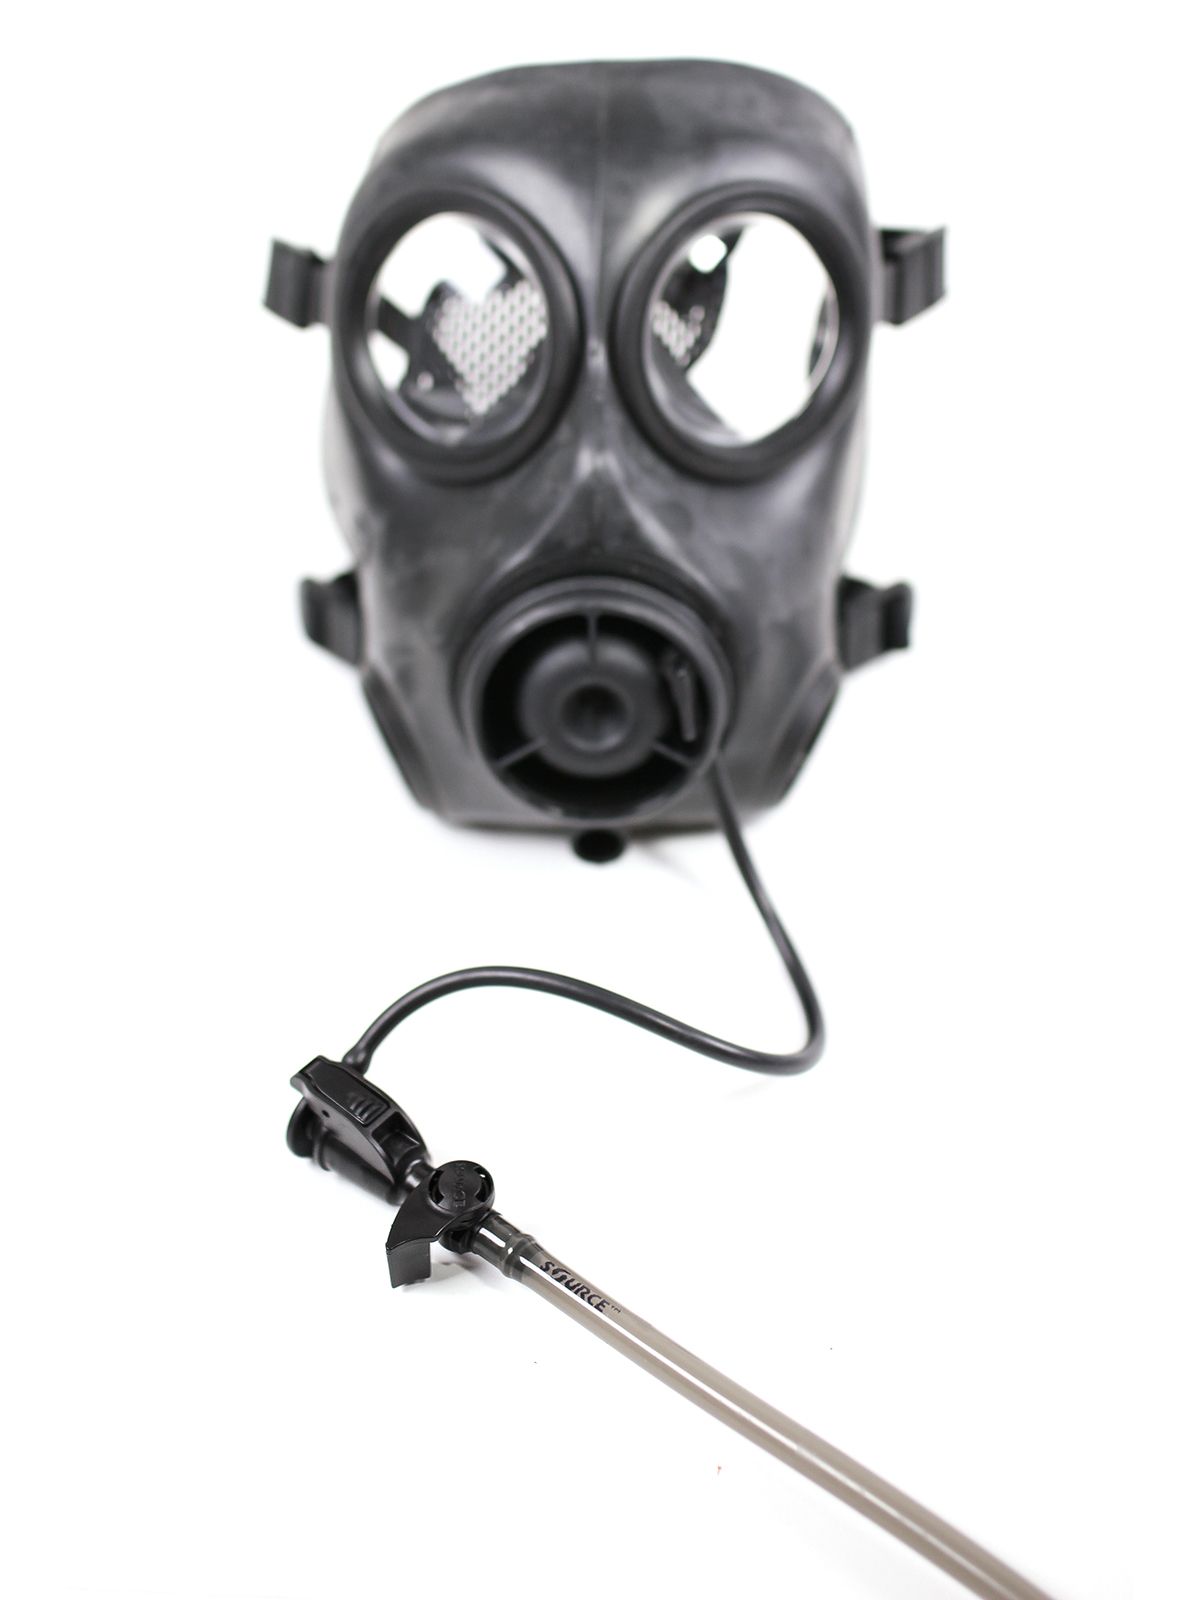 Drink While Wearing Mask, Drink Mask Adapter